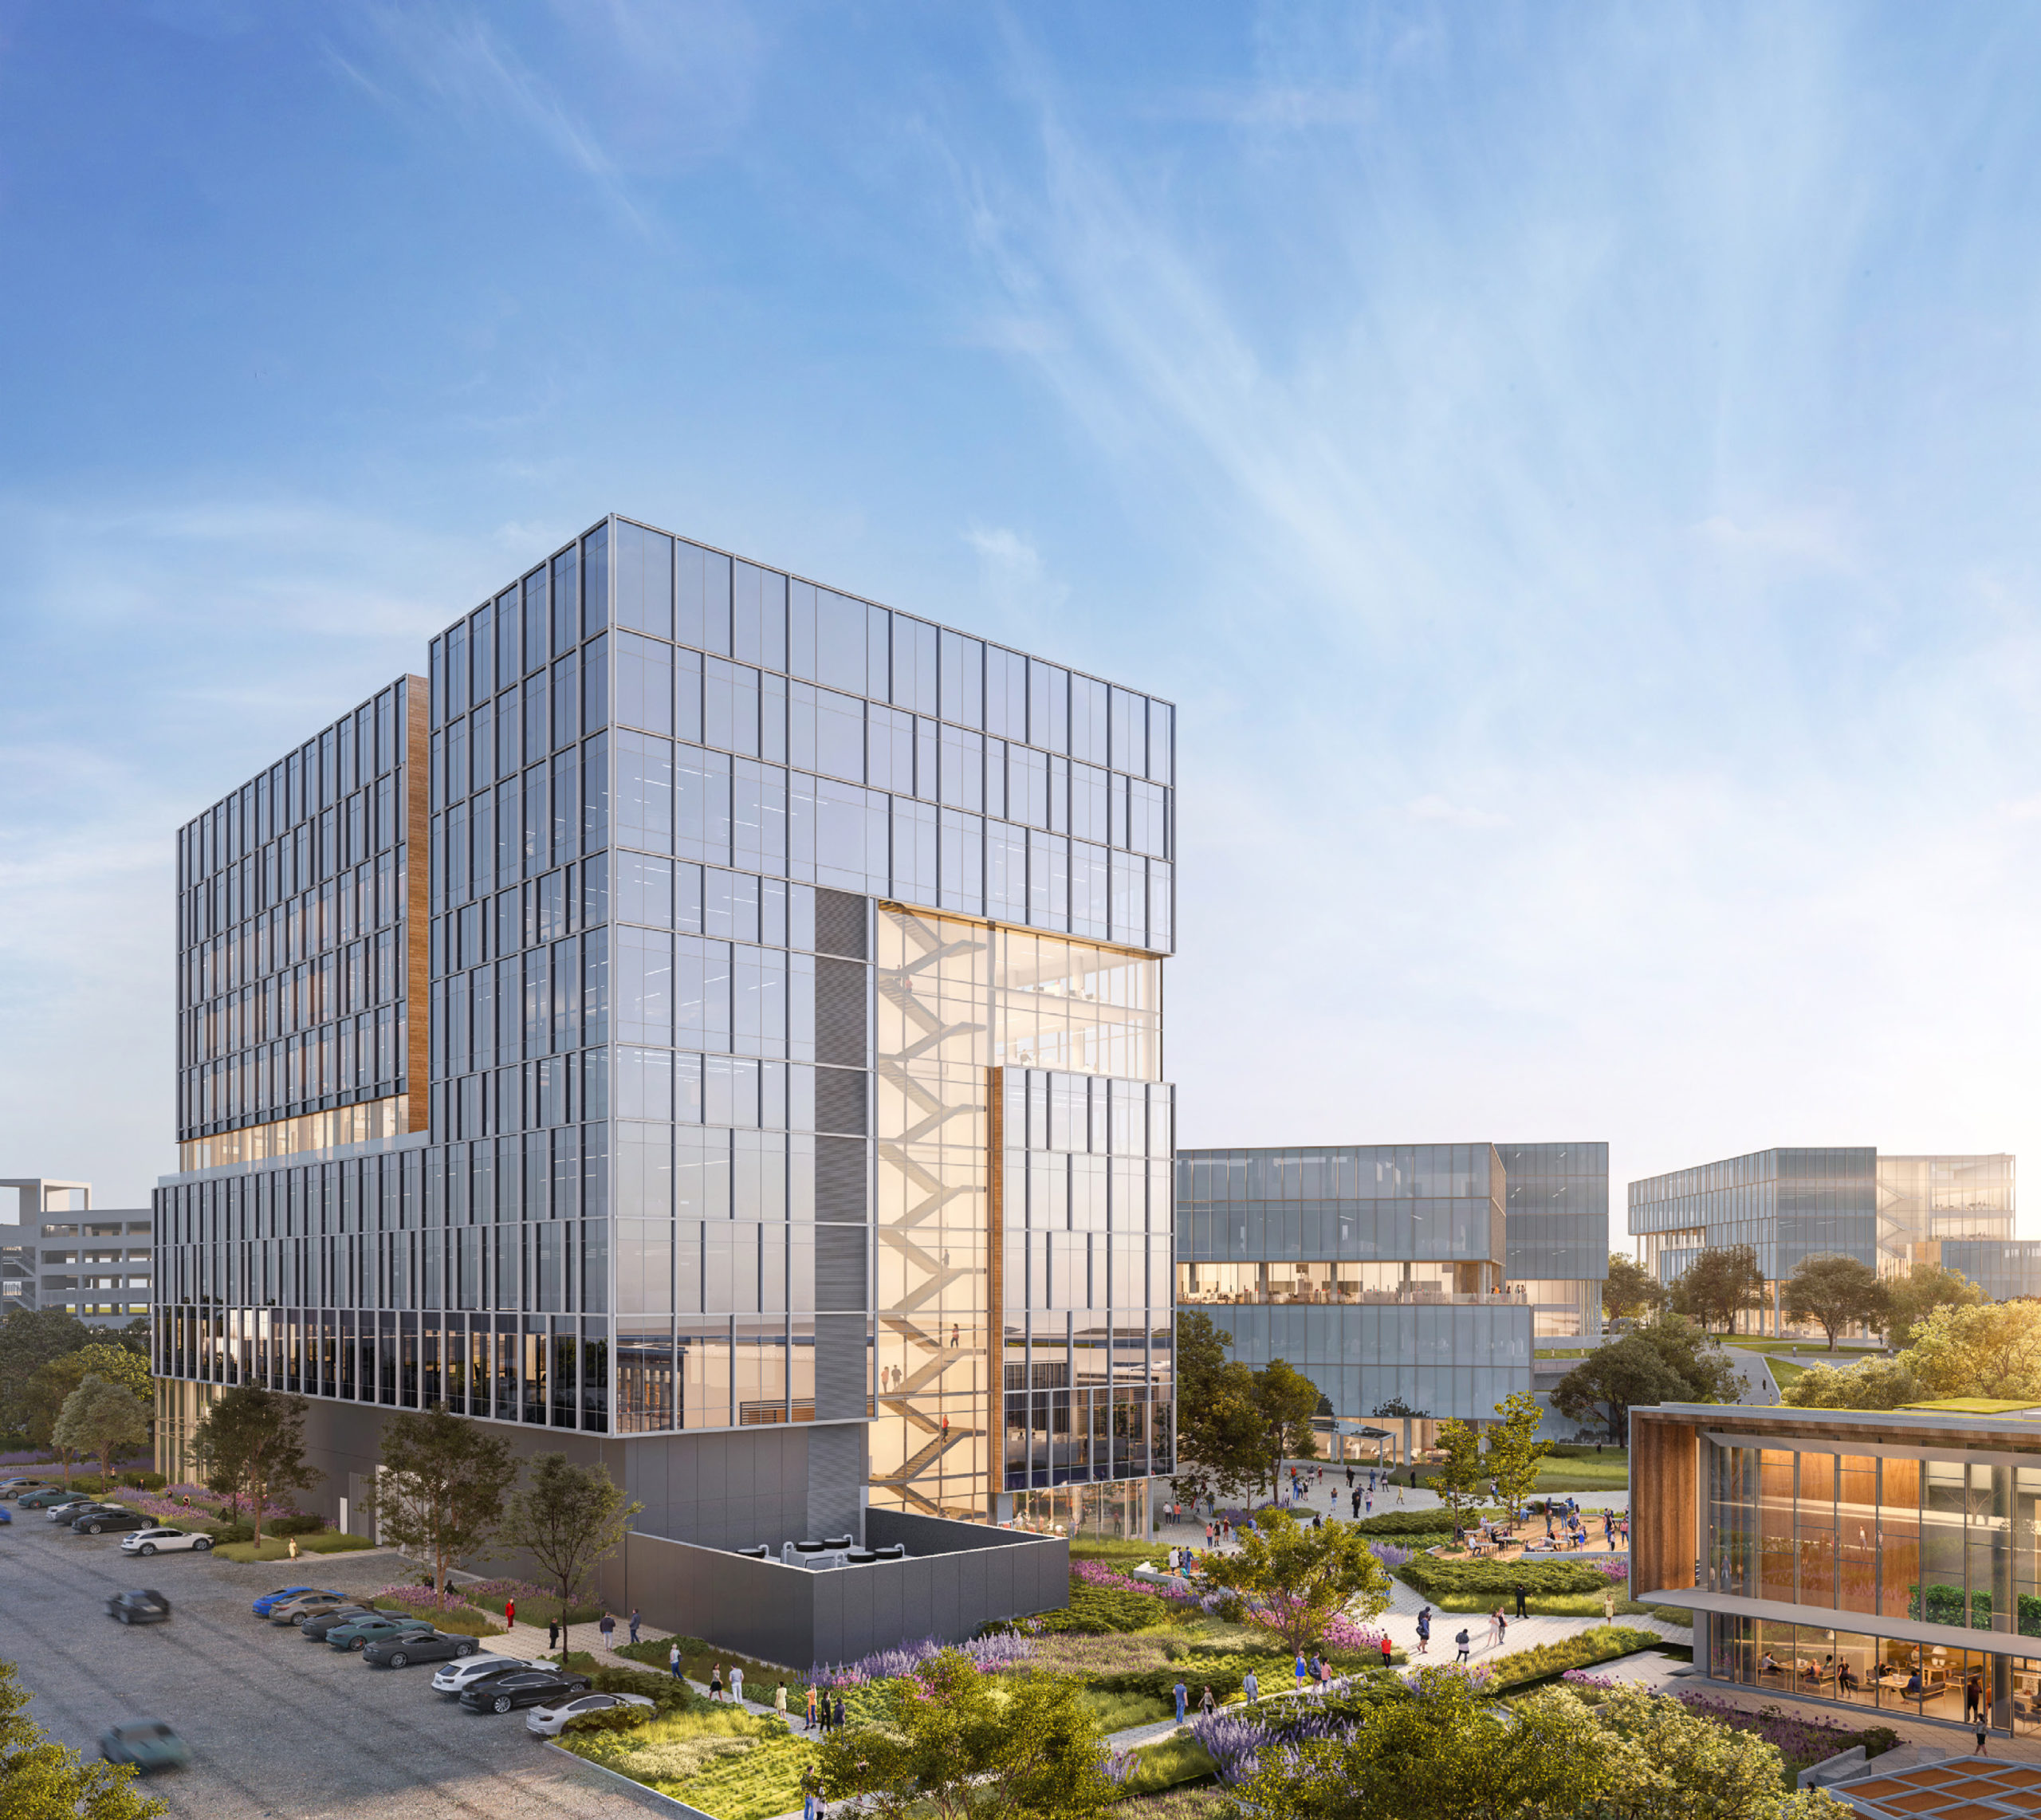 Gateway of Pacific phase four focus on north office with south office and two of the phase five buildings in the background, rendering by Flad Architects